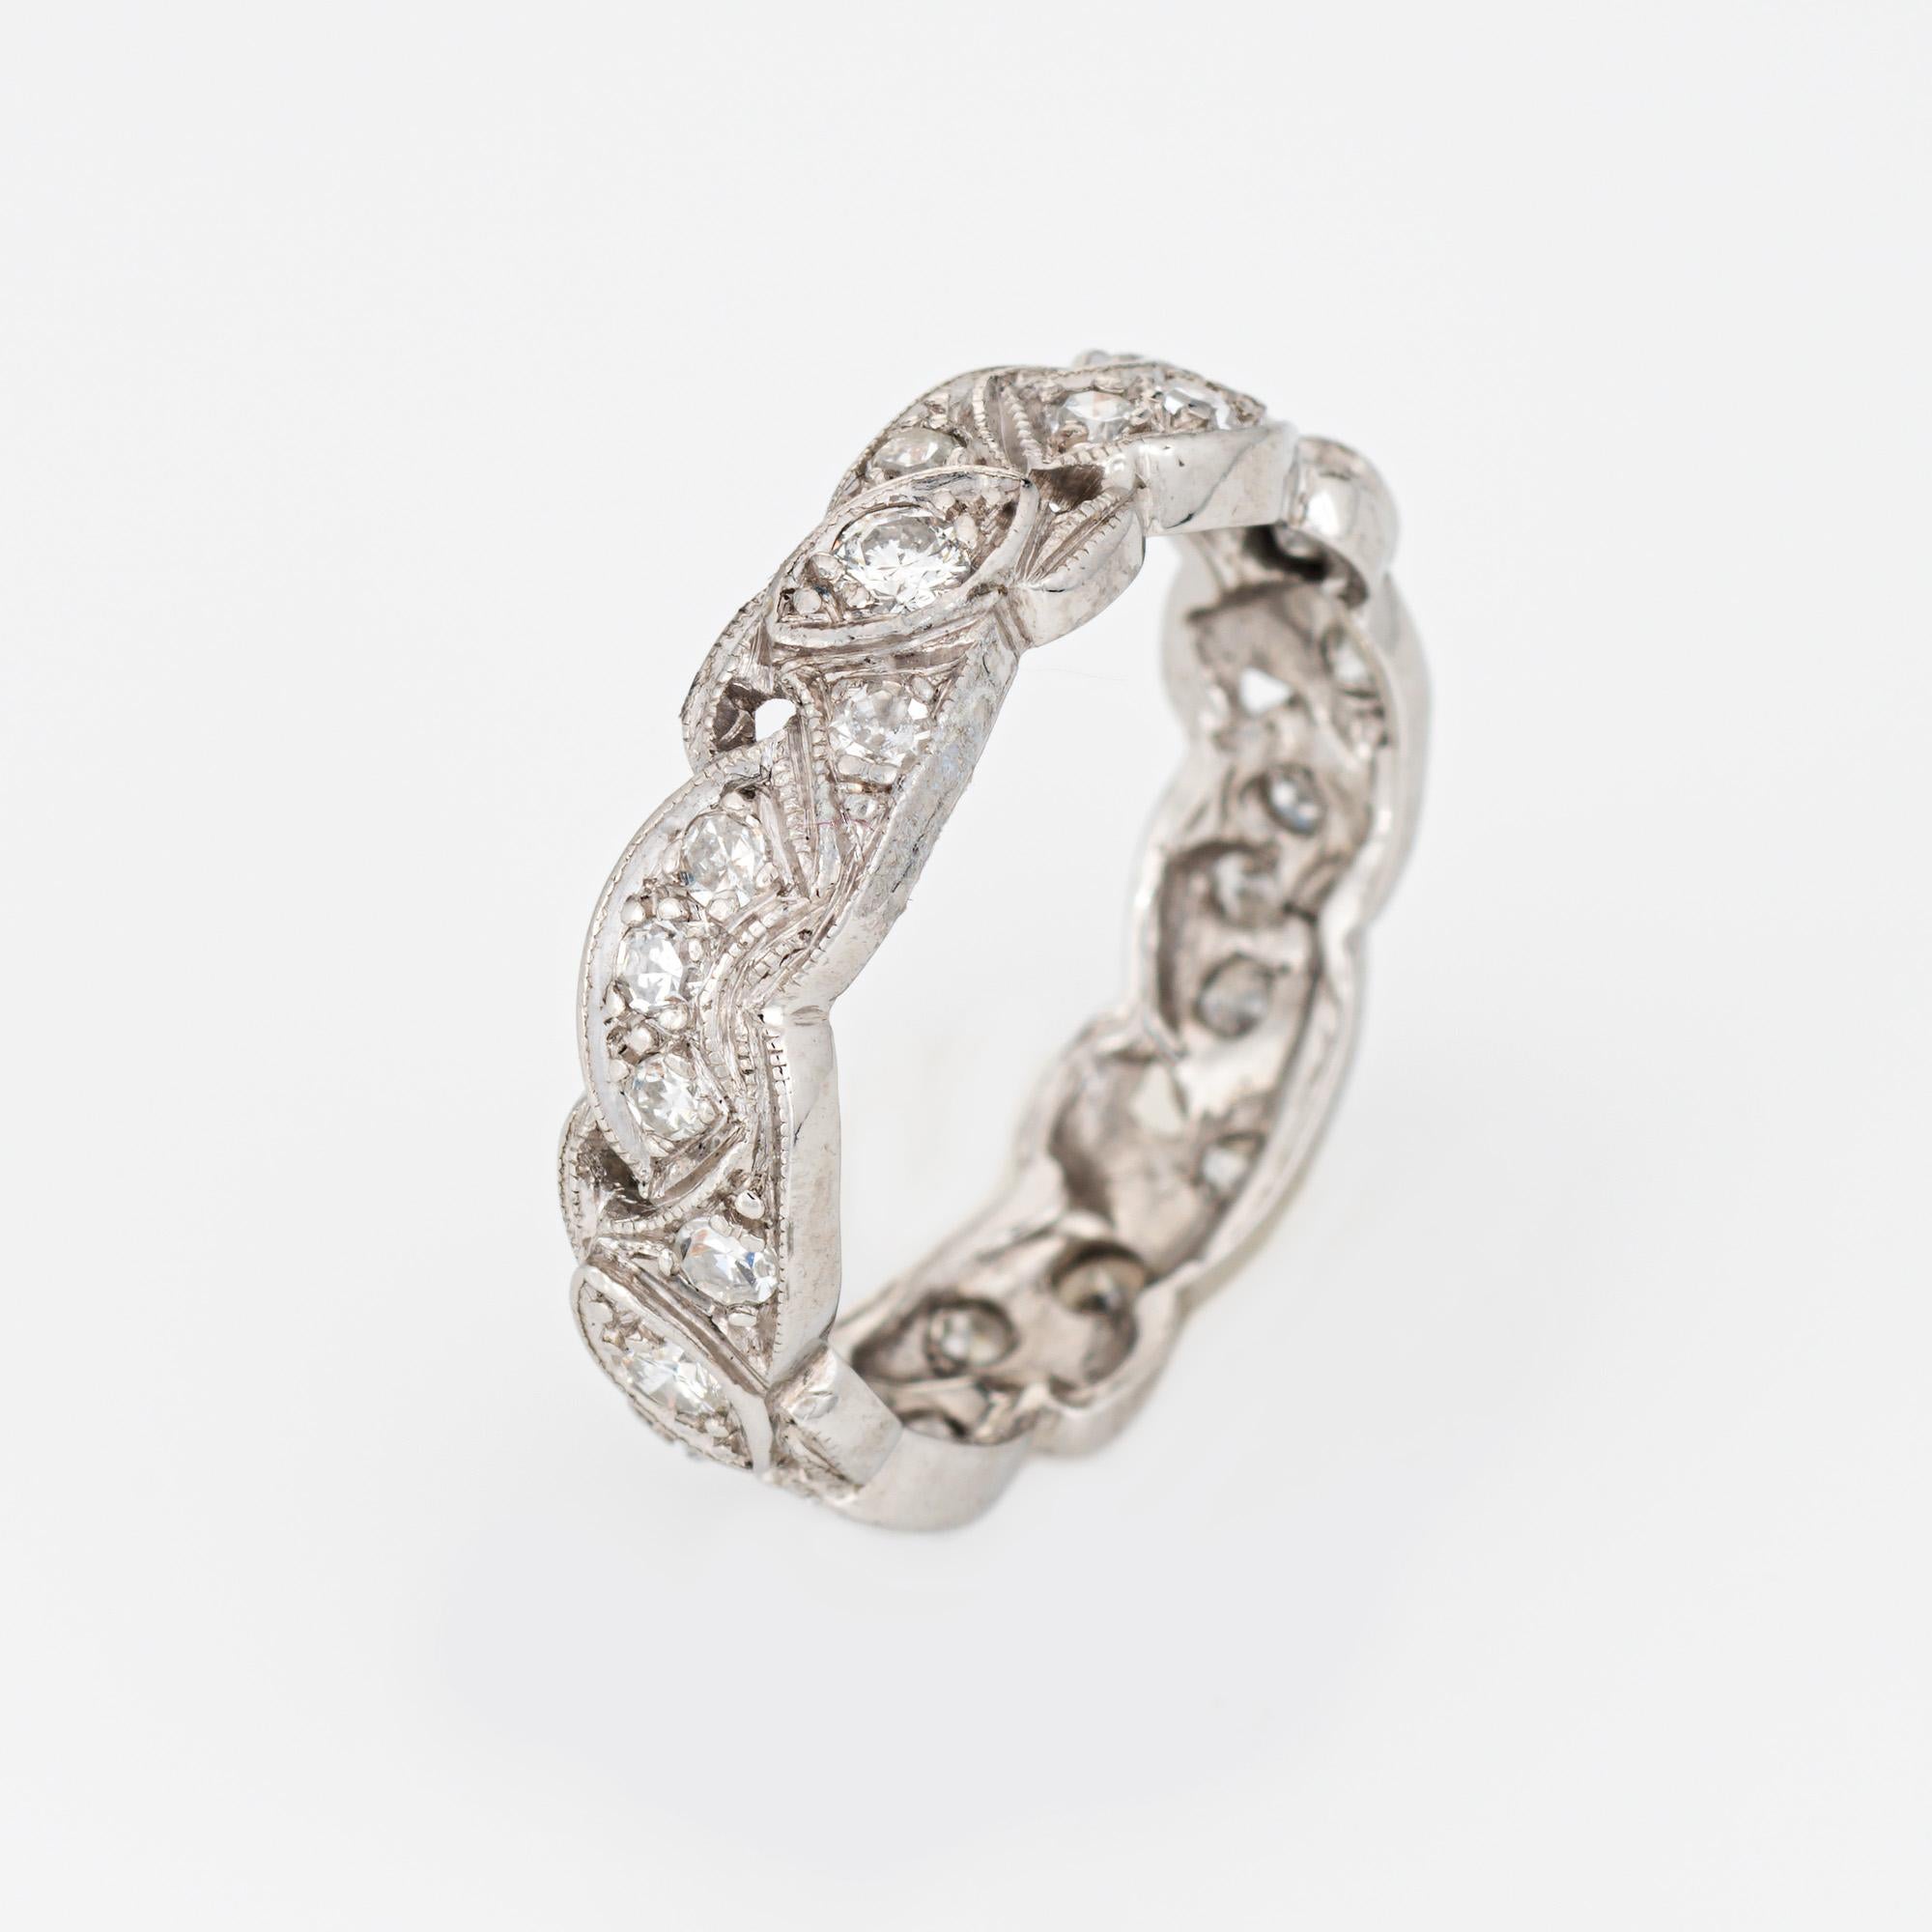 Stylish vintage scrolled diamond band (circa 1950s) crafted in 900 platinum. 

Round brilliant & single cut diamonds total an estimated 0.40 carats (estimated at H-I color and VS2-SI2 clarity). 

The charming Mid Century scrolled ring is set with